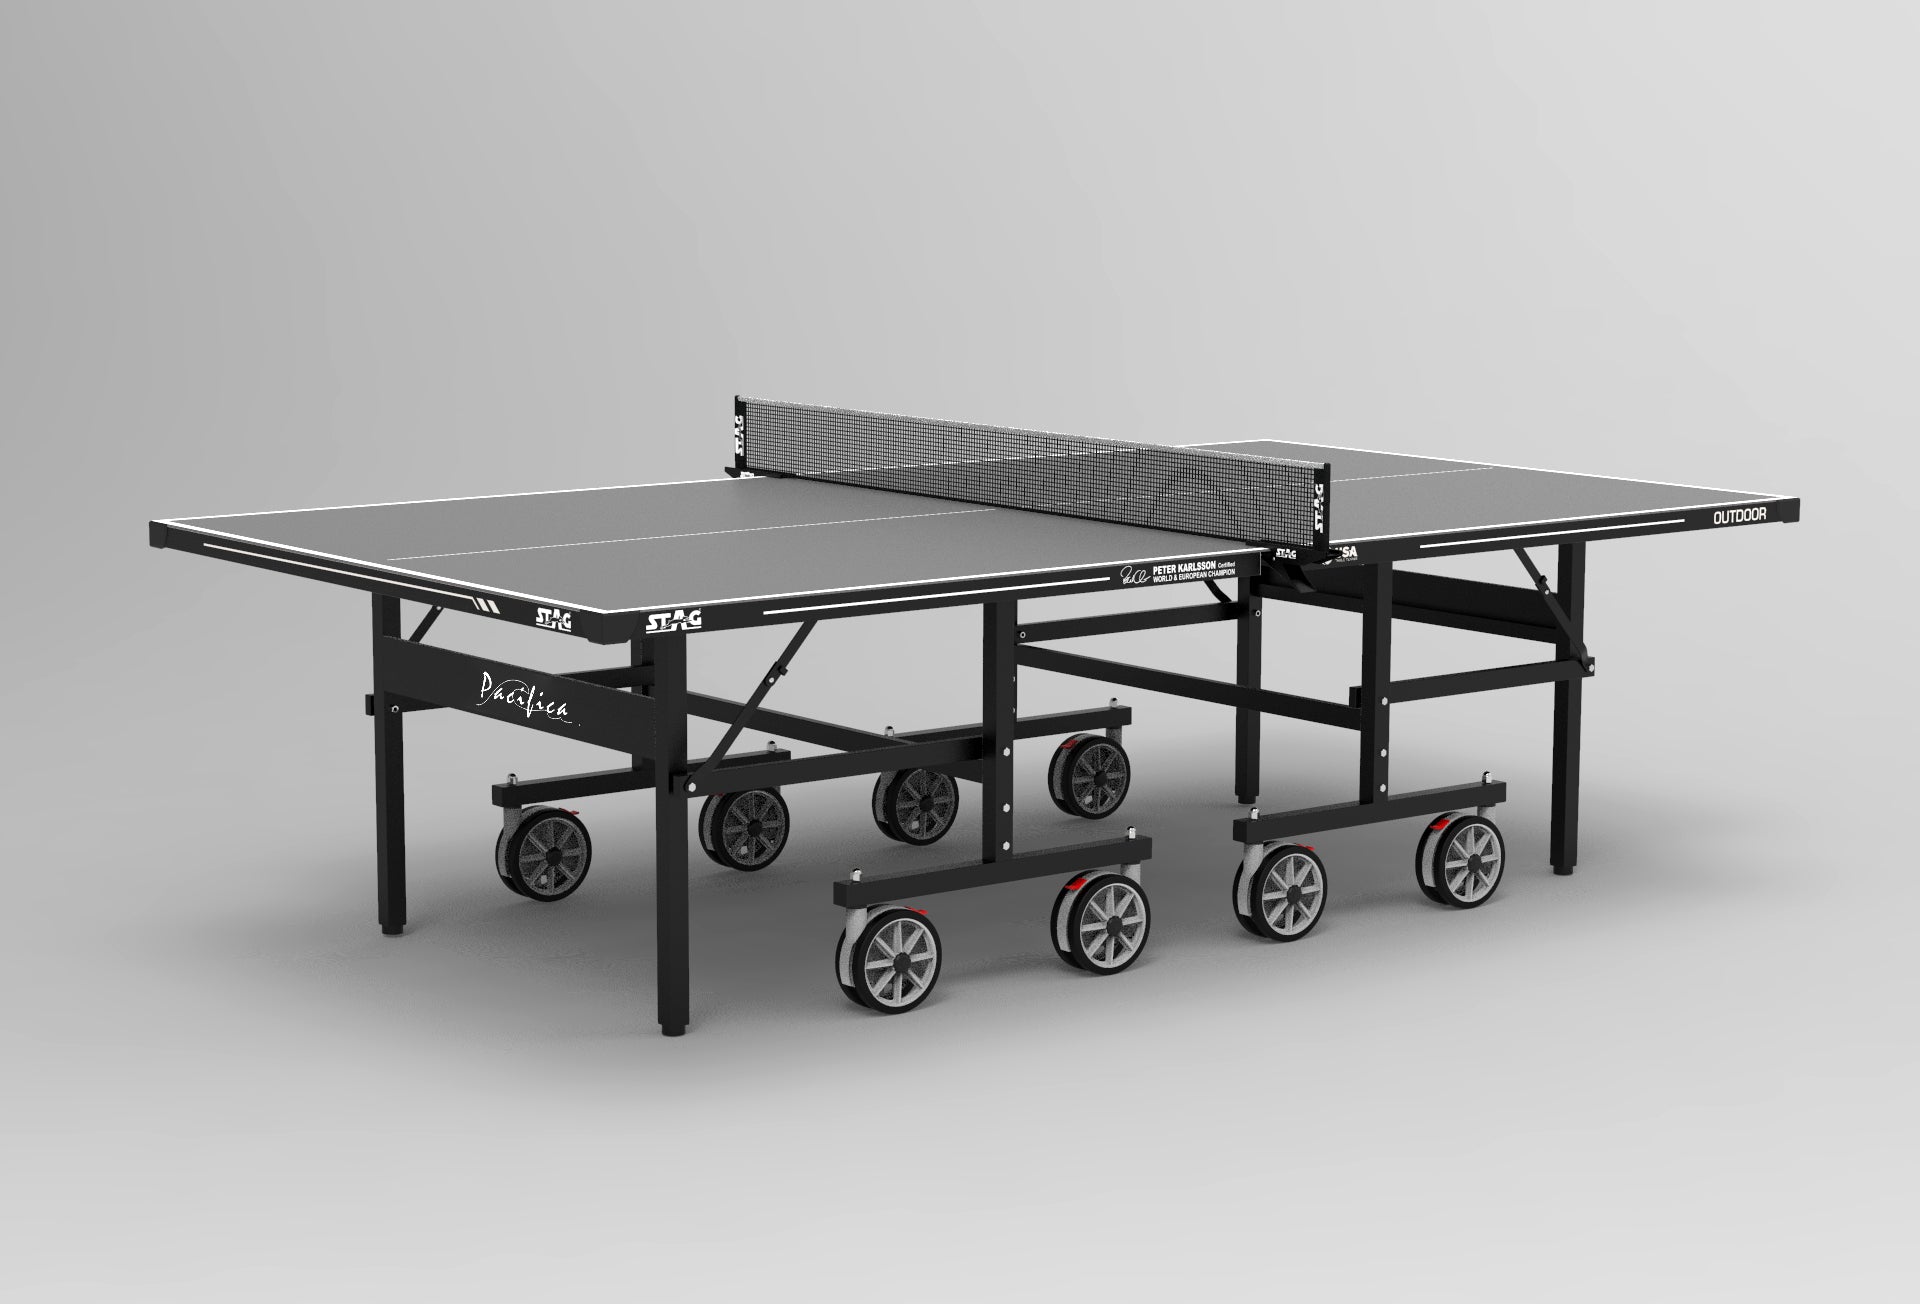 Weatheproof Pacifica Professional Table Tennis Table